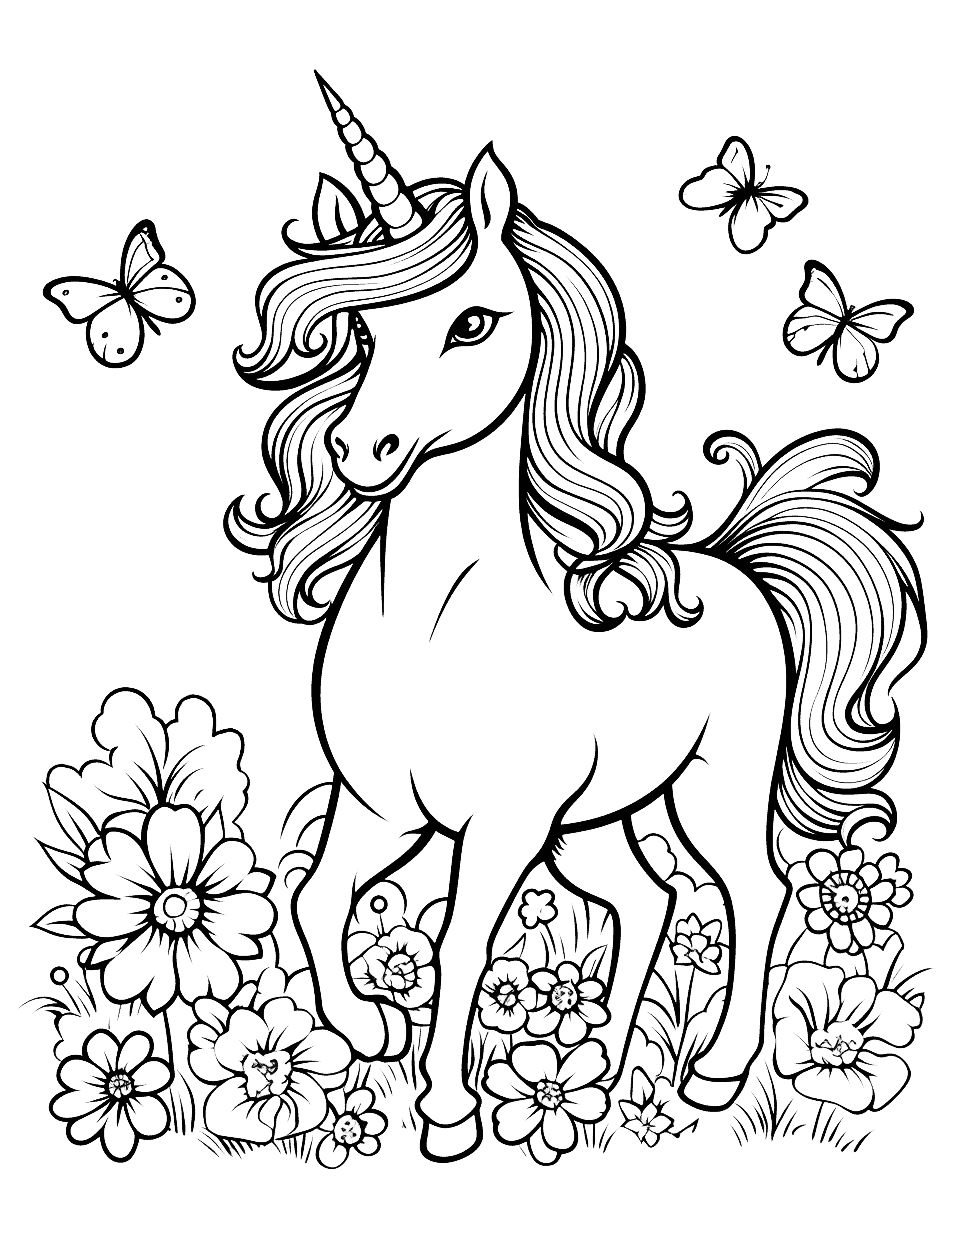 Unicorn with Butterfly Friends Coloring Page - A graceful unicorn in a meadow, surrounded by colorful butterflies and beautiful flowers.